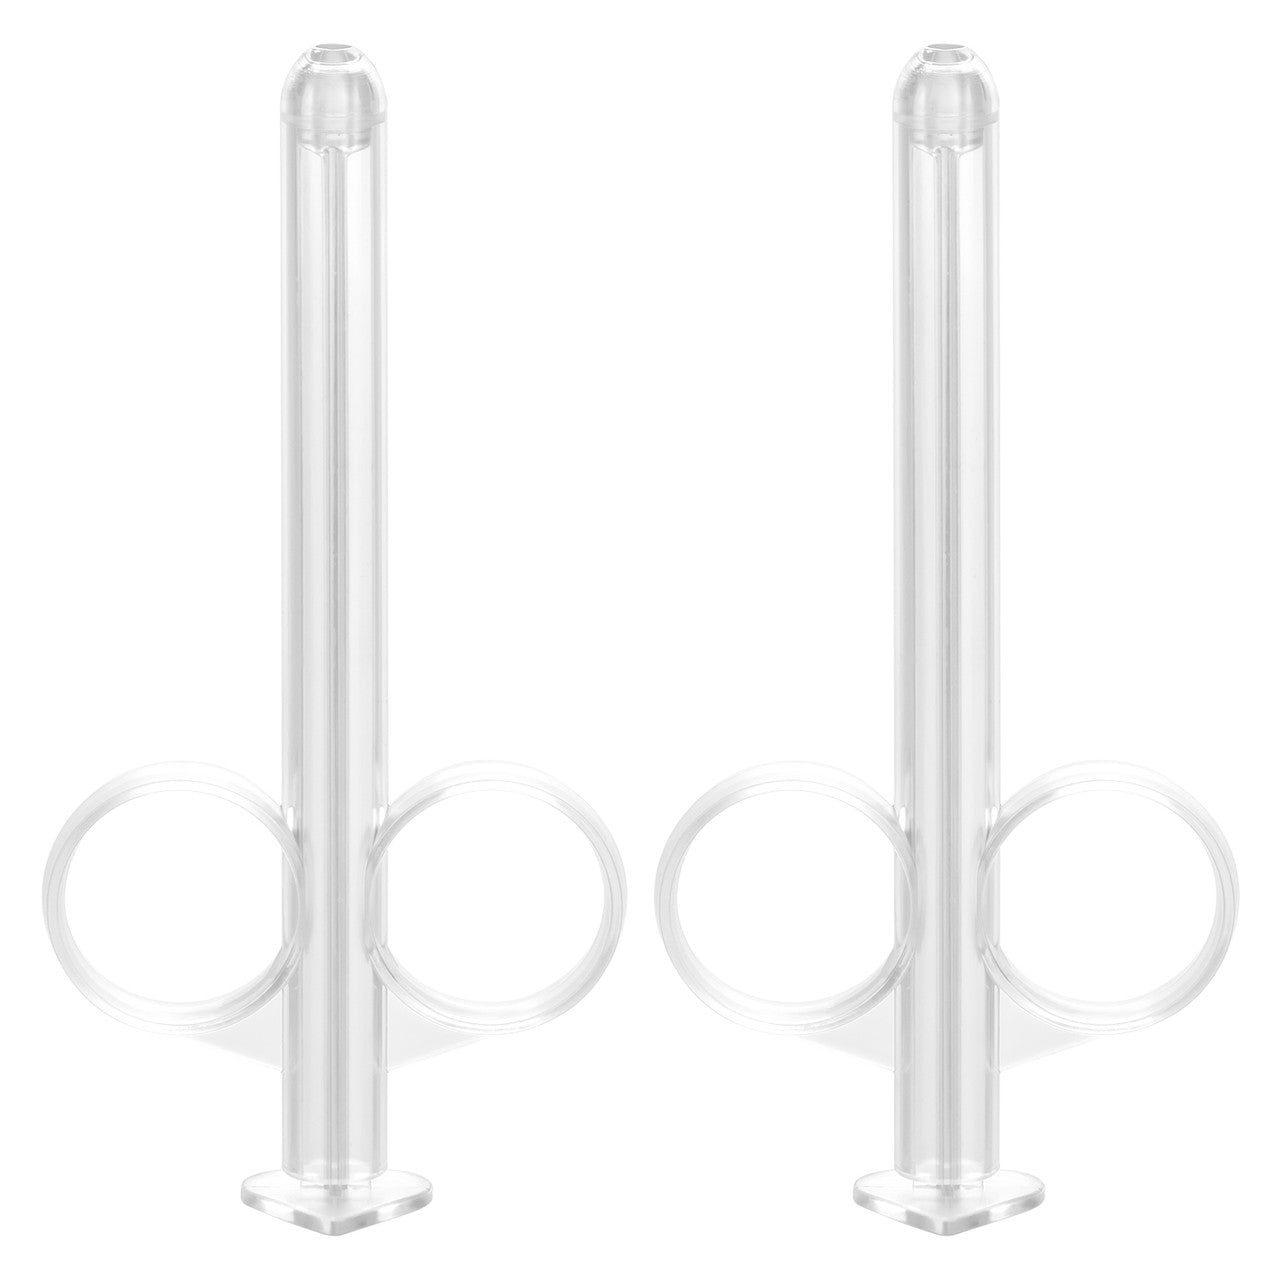 Lube Tube Applicator 2 Pack - Clear - Thorn & Feather